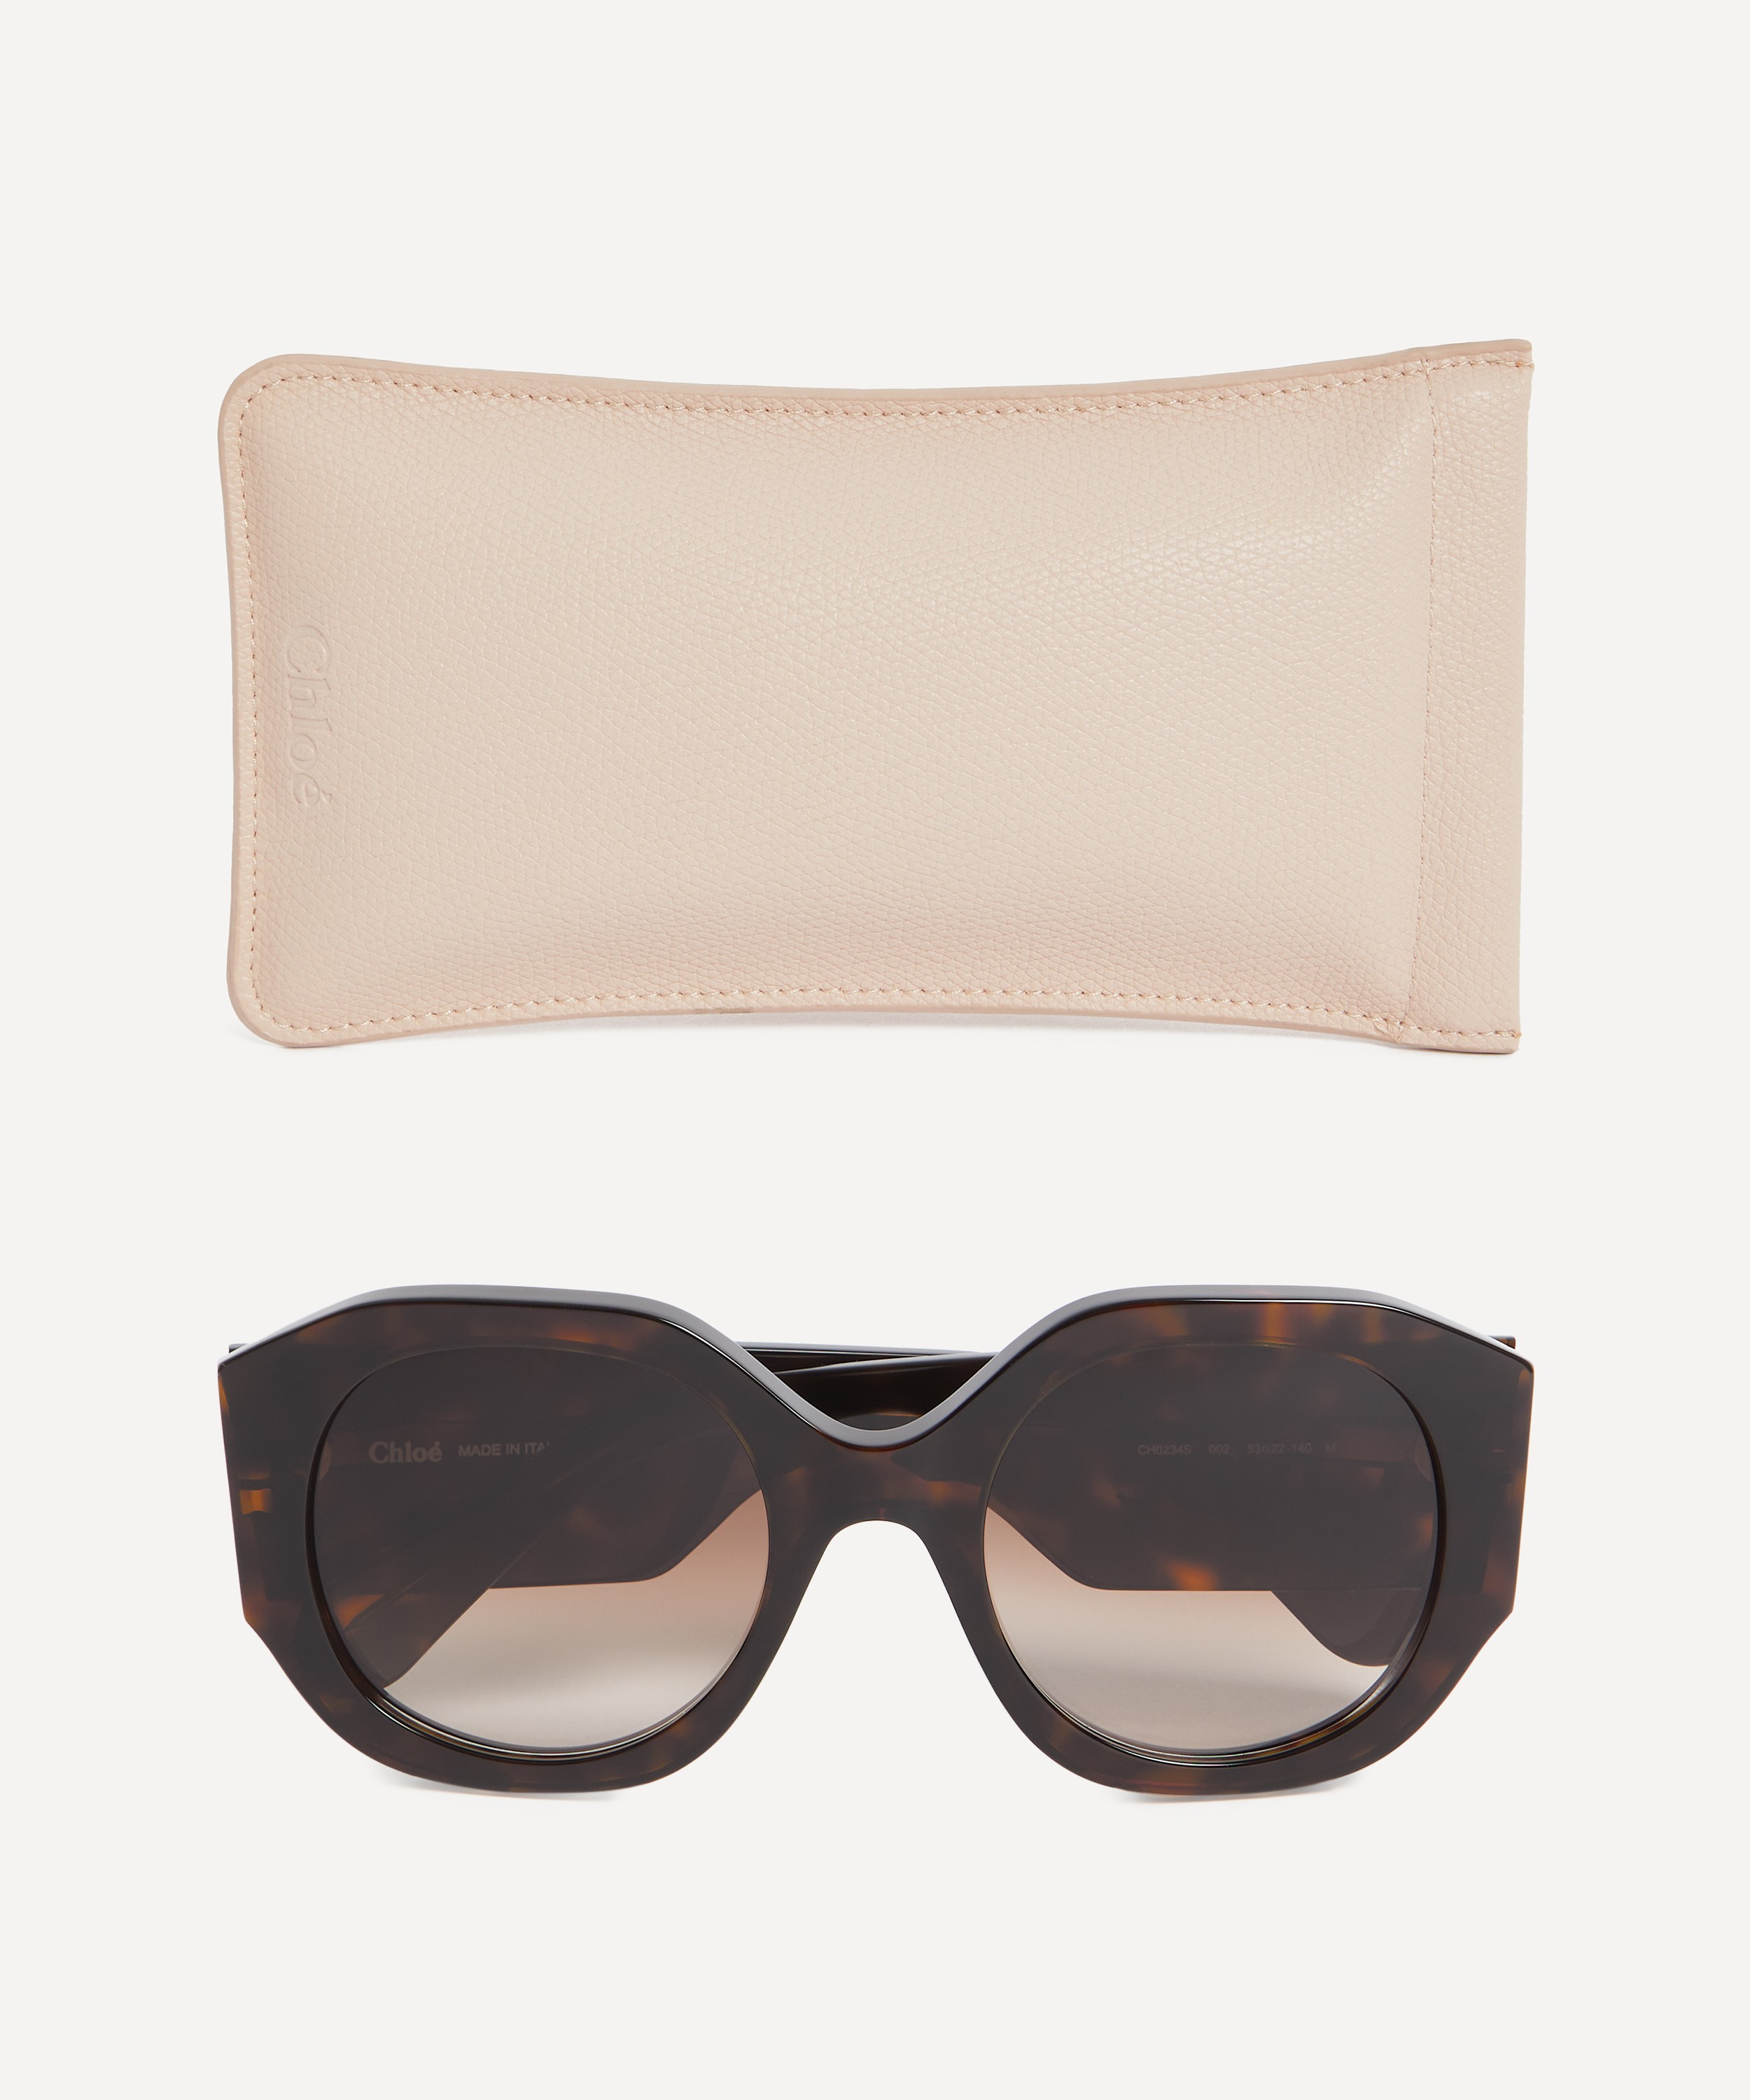 Chloé - Oval Sunglasses image number 3